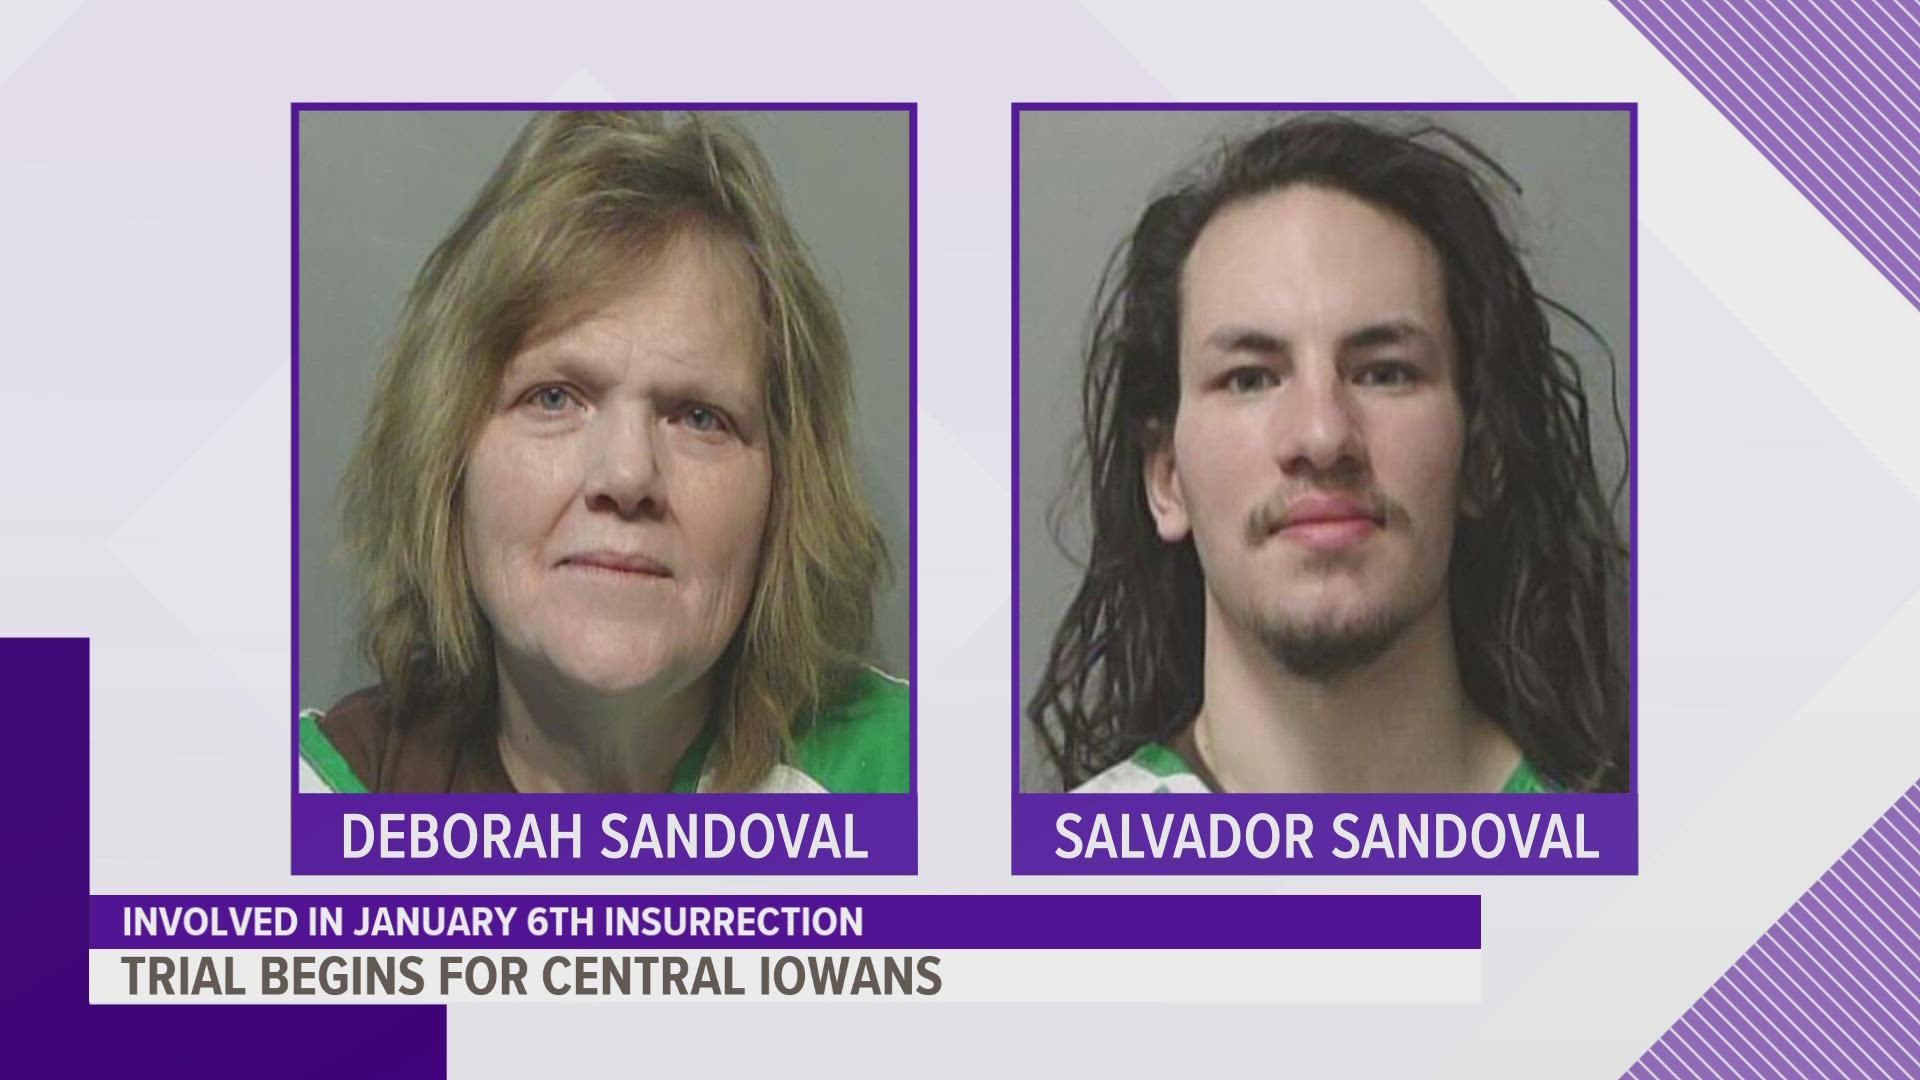 Deborah Sandoval pleaded guilty this morning just before her bench trial was set to take place. Her son, Salvador, will continue with his bench trial.